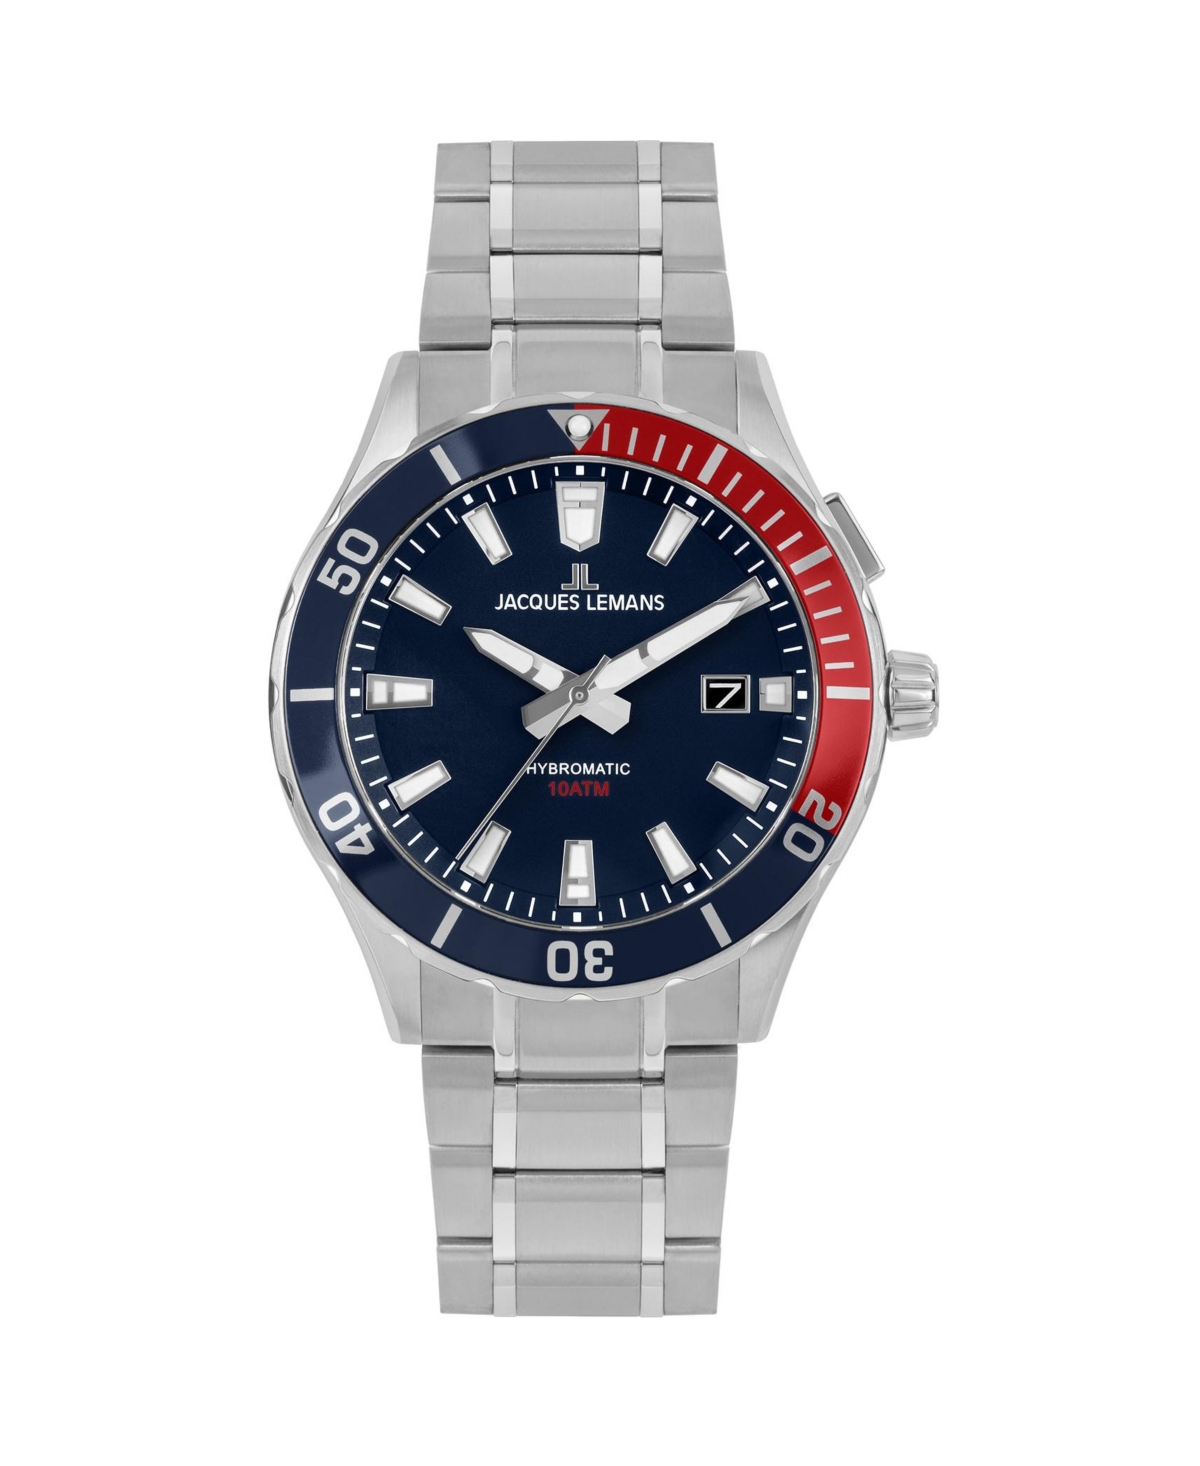 Men's Hybromatic Watch with Solid Stainless Steel Strap 1-2131 - Dark blue